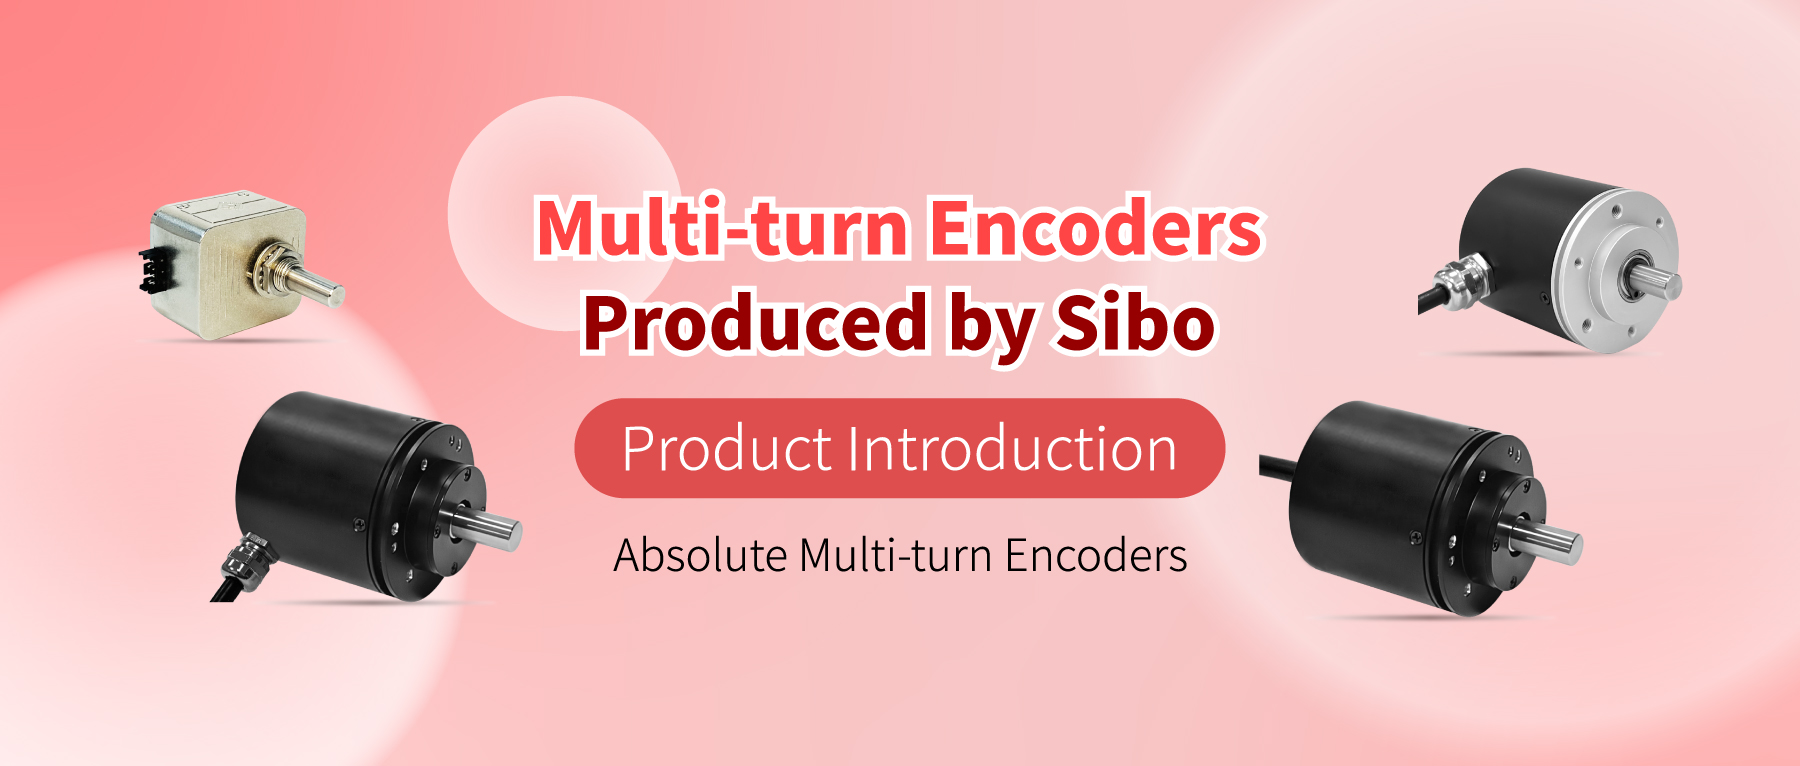 Sibo Multi-urn Encoders, Your Professional Choice！